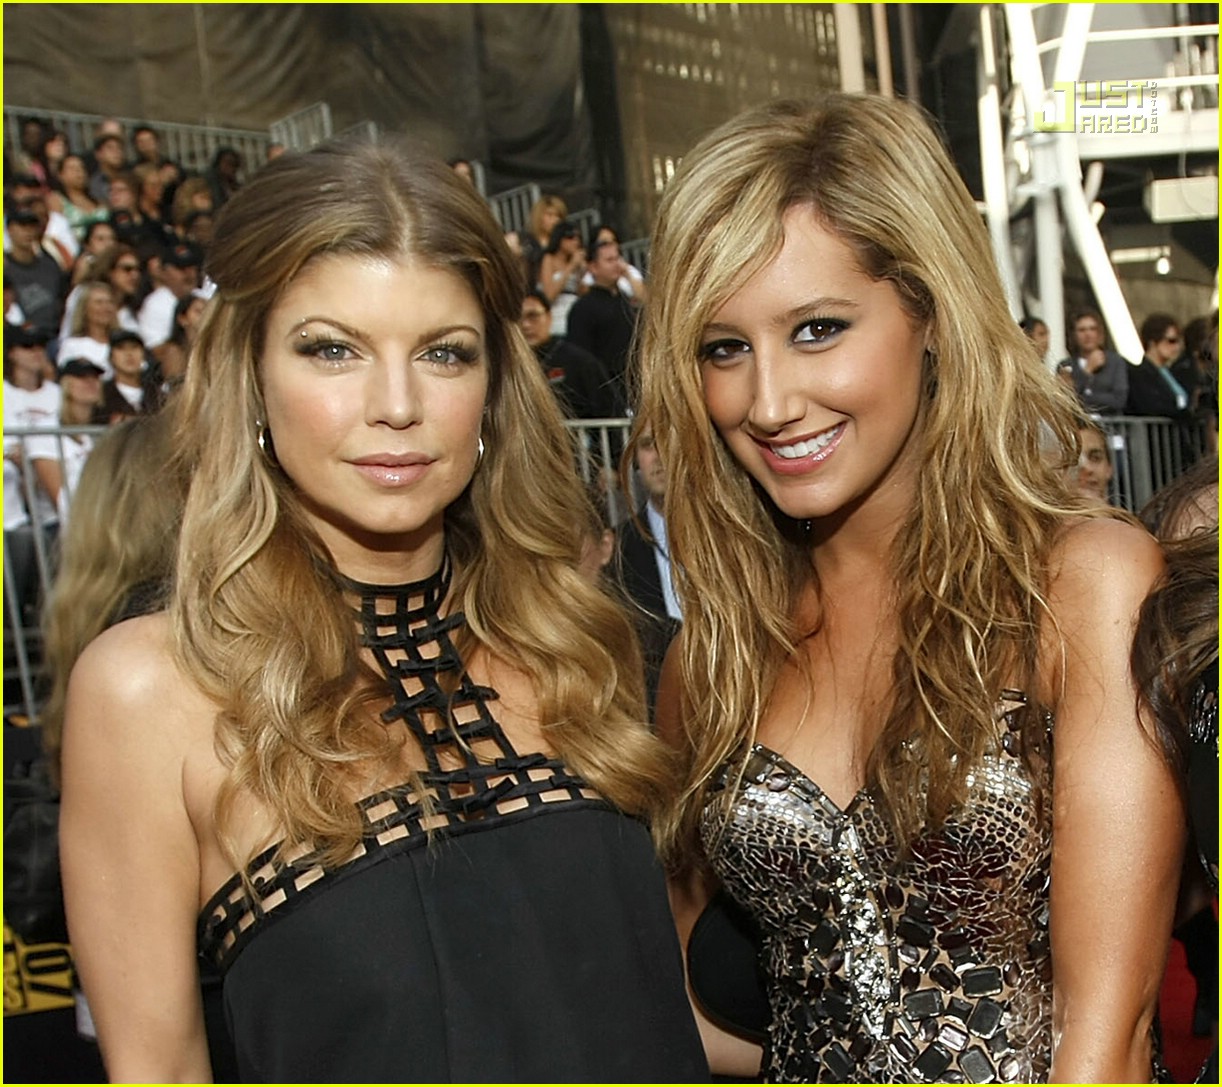 Ashley Tisdale in American Music Awards 2007